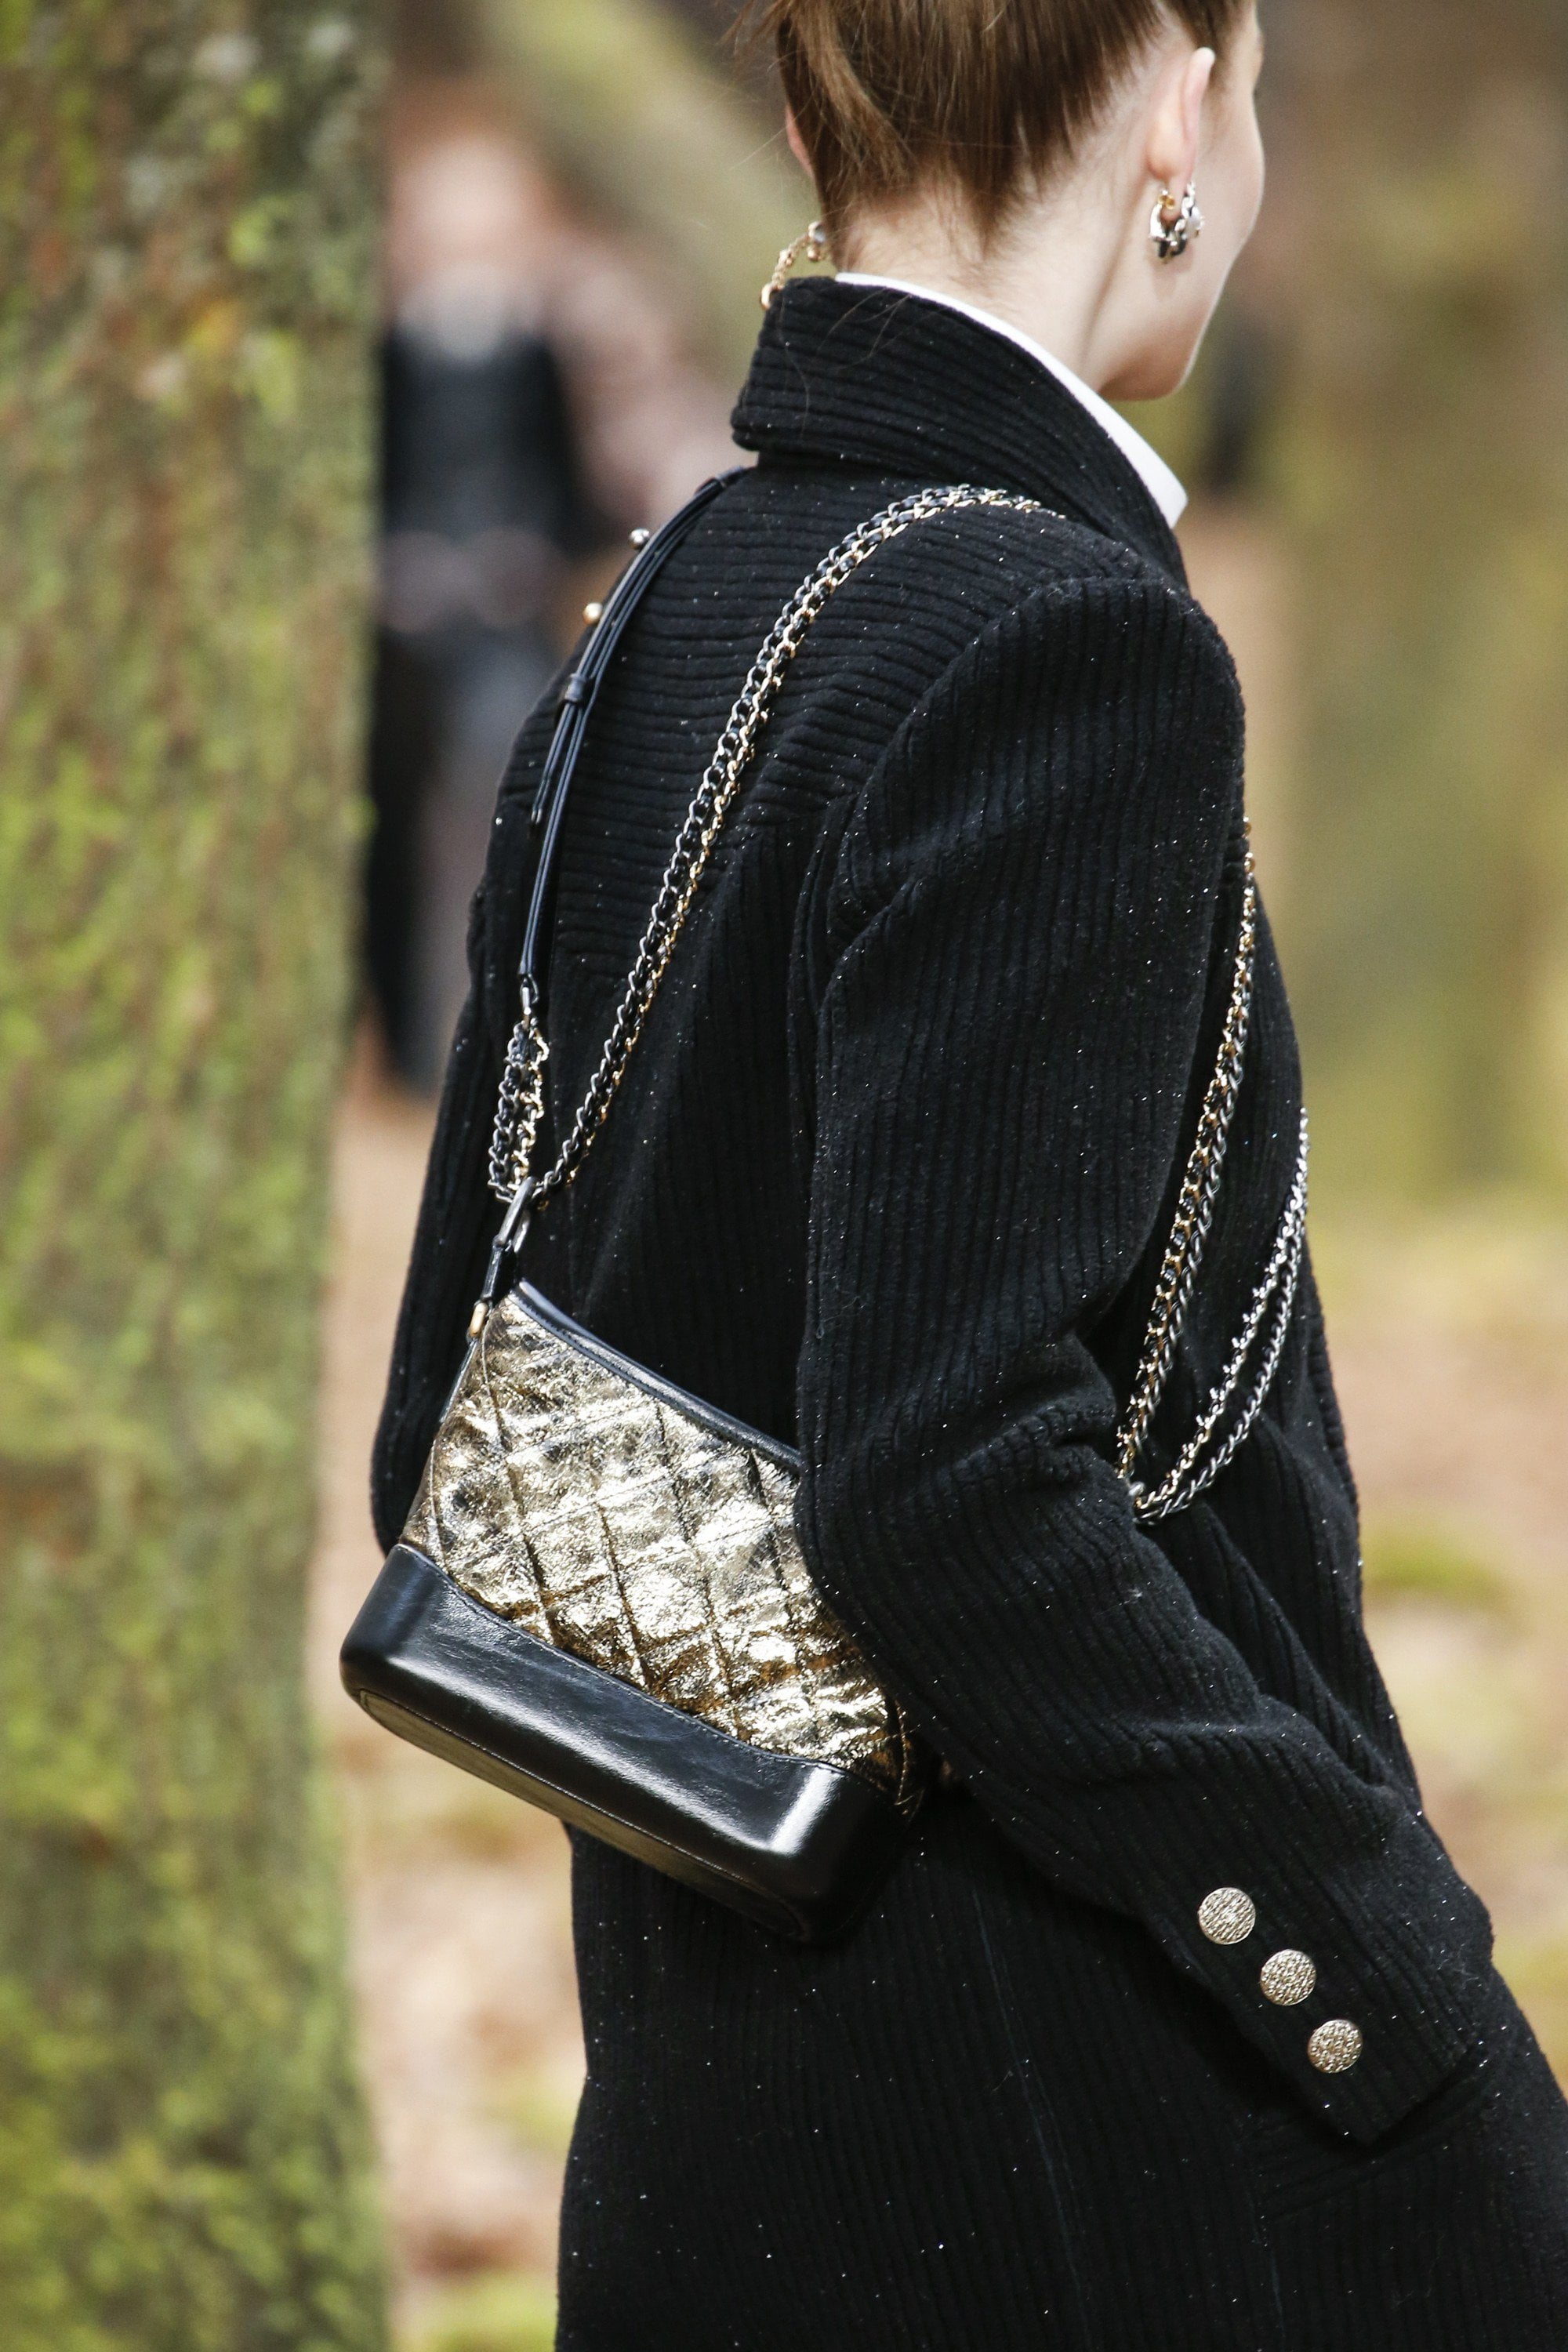 Did You See the New Chanel 31 Bag for Fall 2018?